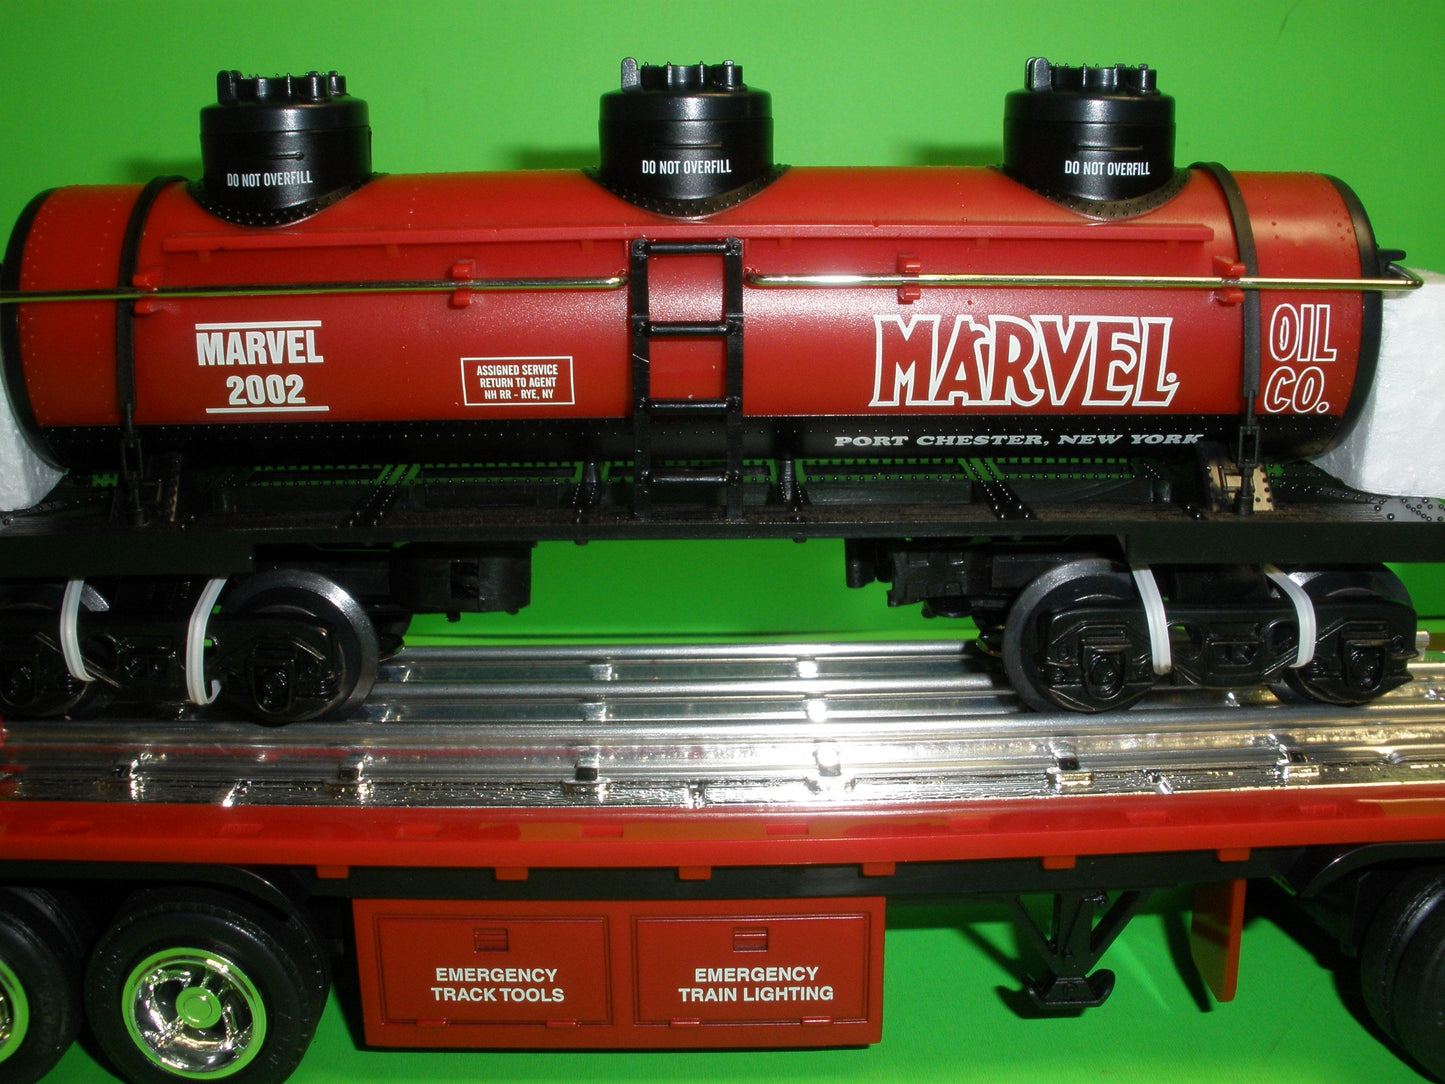 2002 Marvel Mystery Oil Flatbed Tractor Trailer Truck & Train 3 Dome Tanker Car